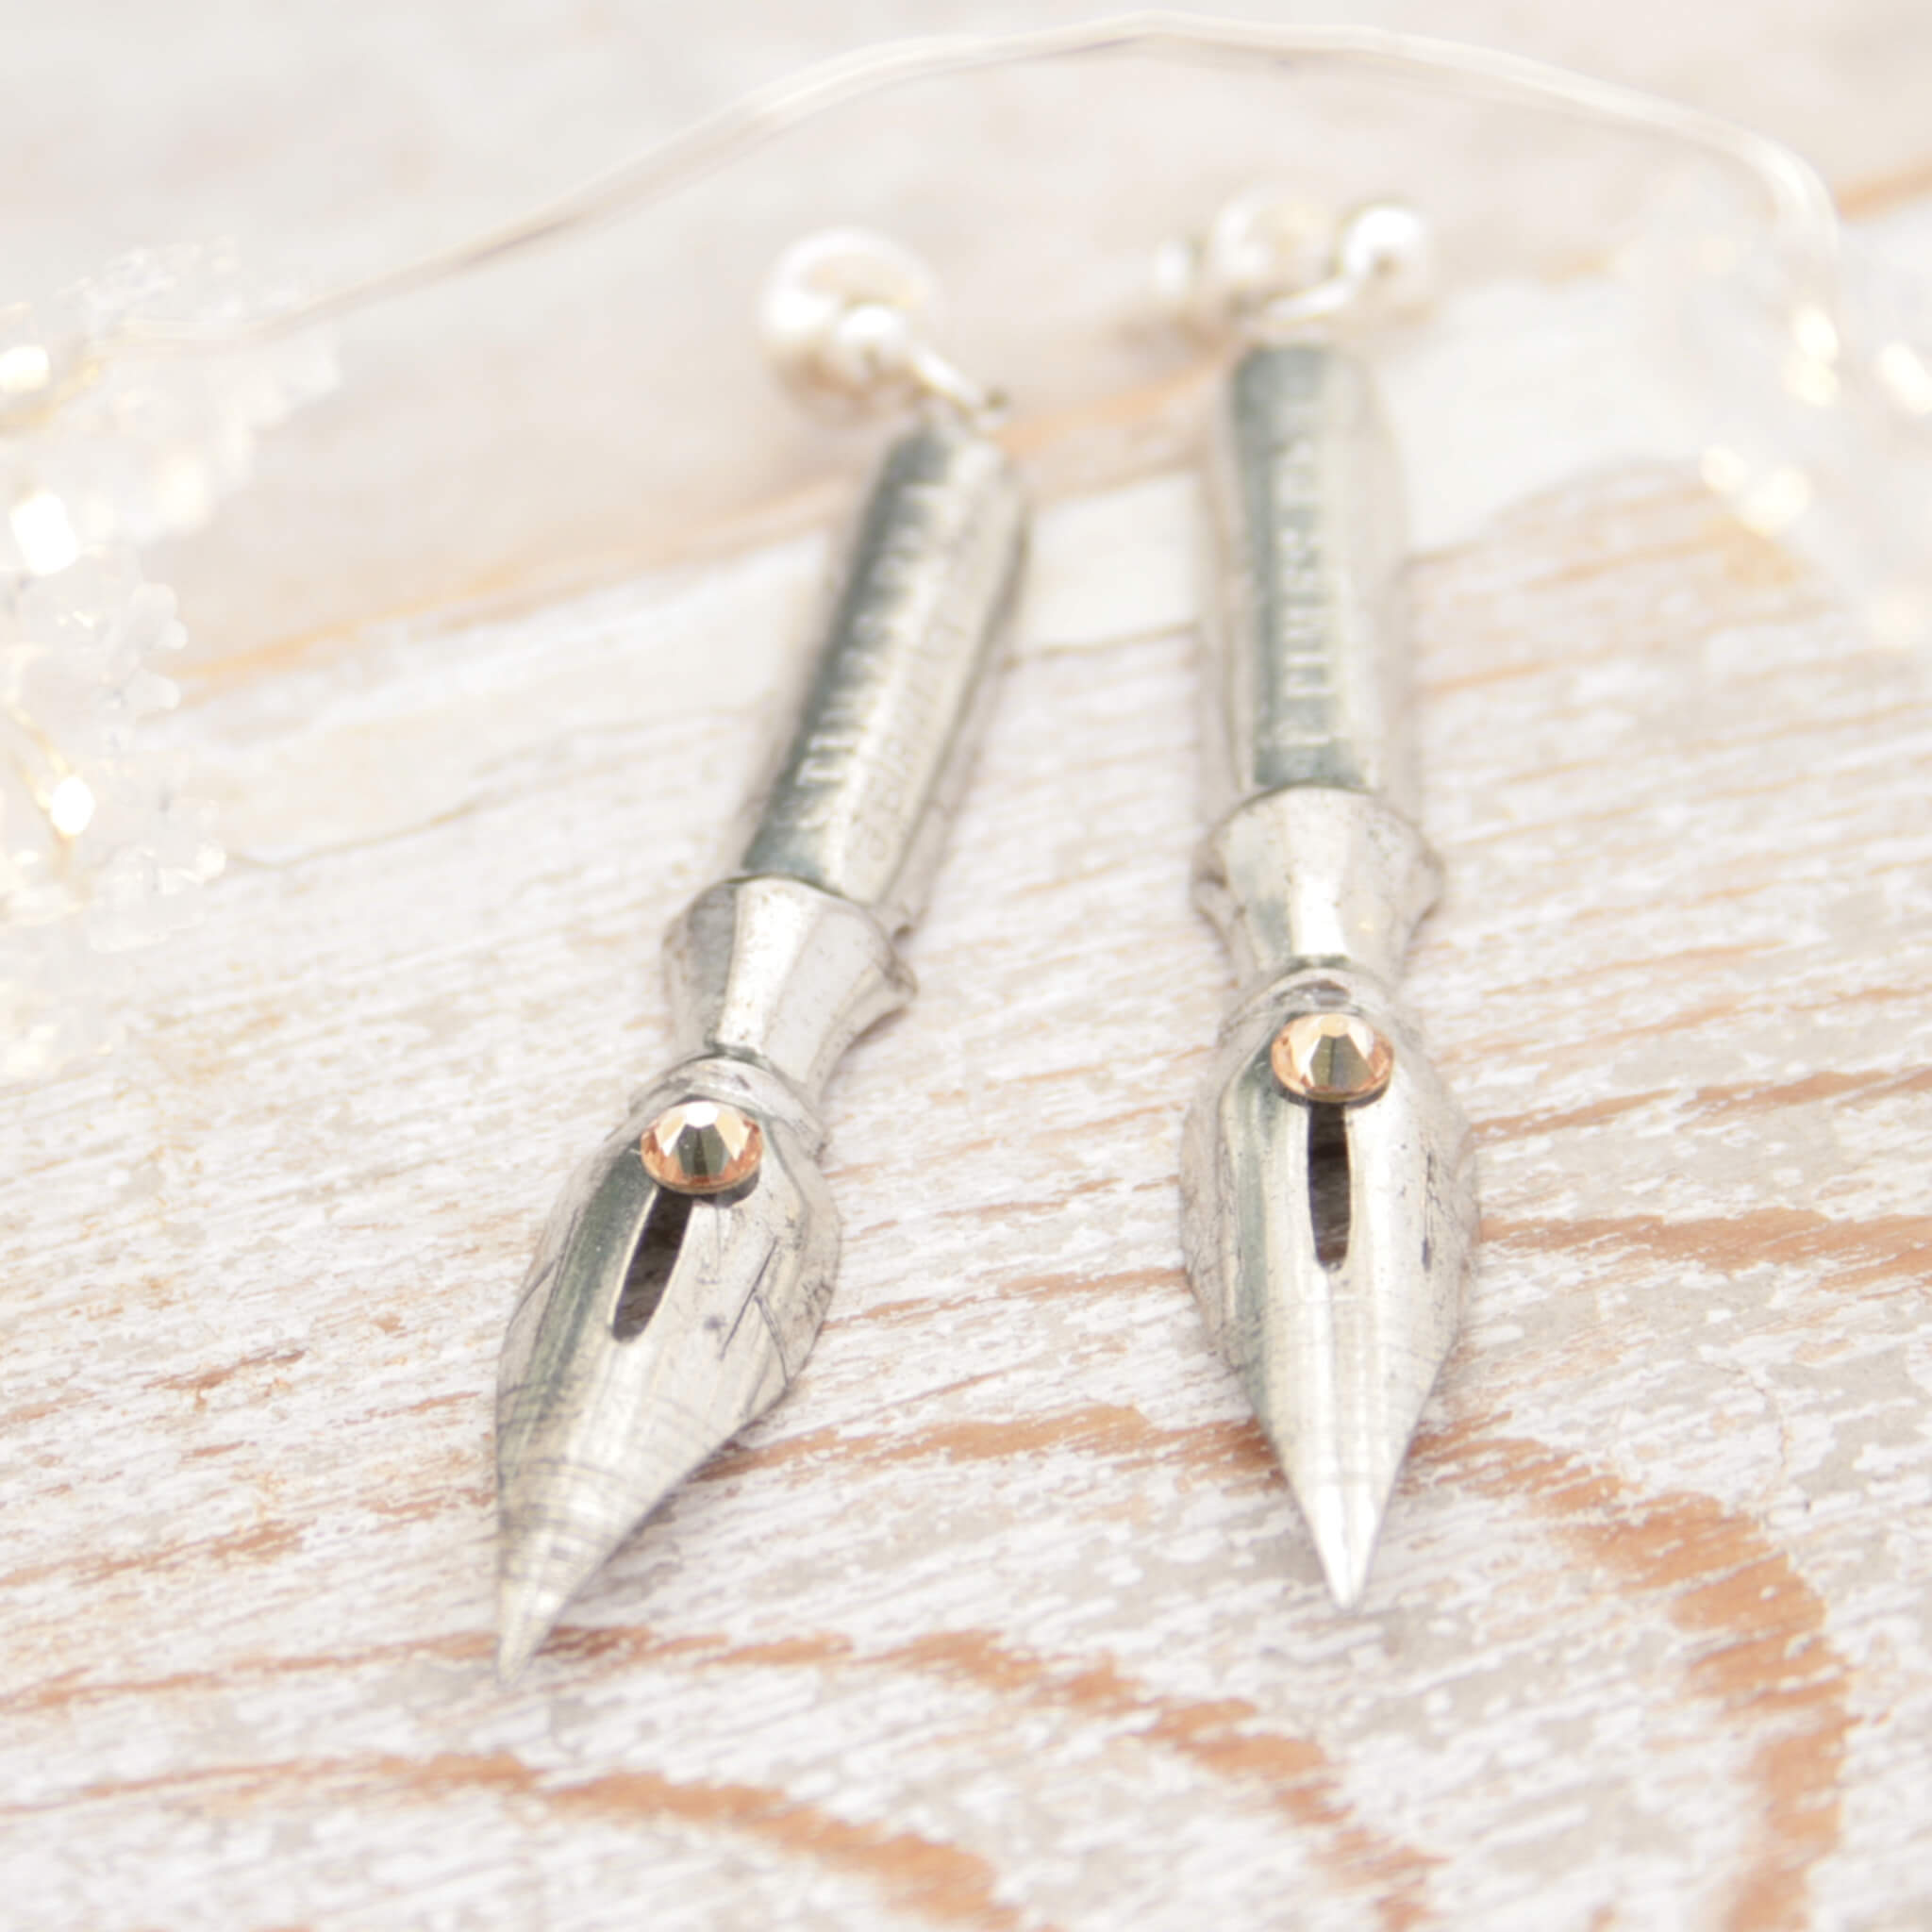 pen nib earrings with light topaz crystals on them lying on a white wooden plank